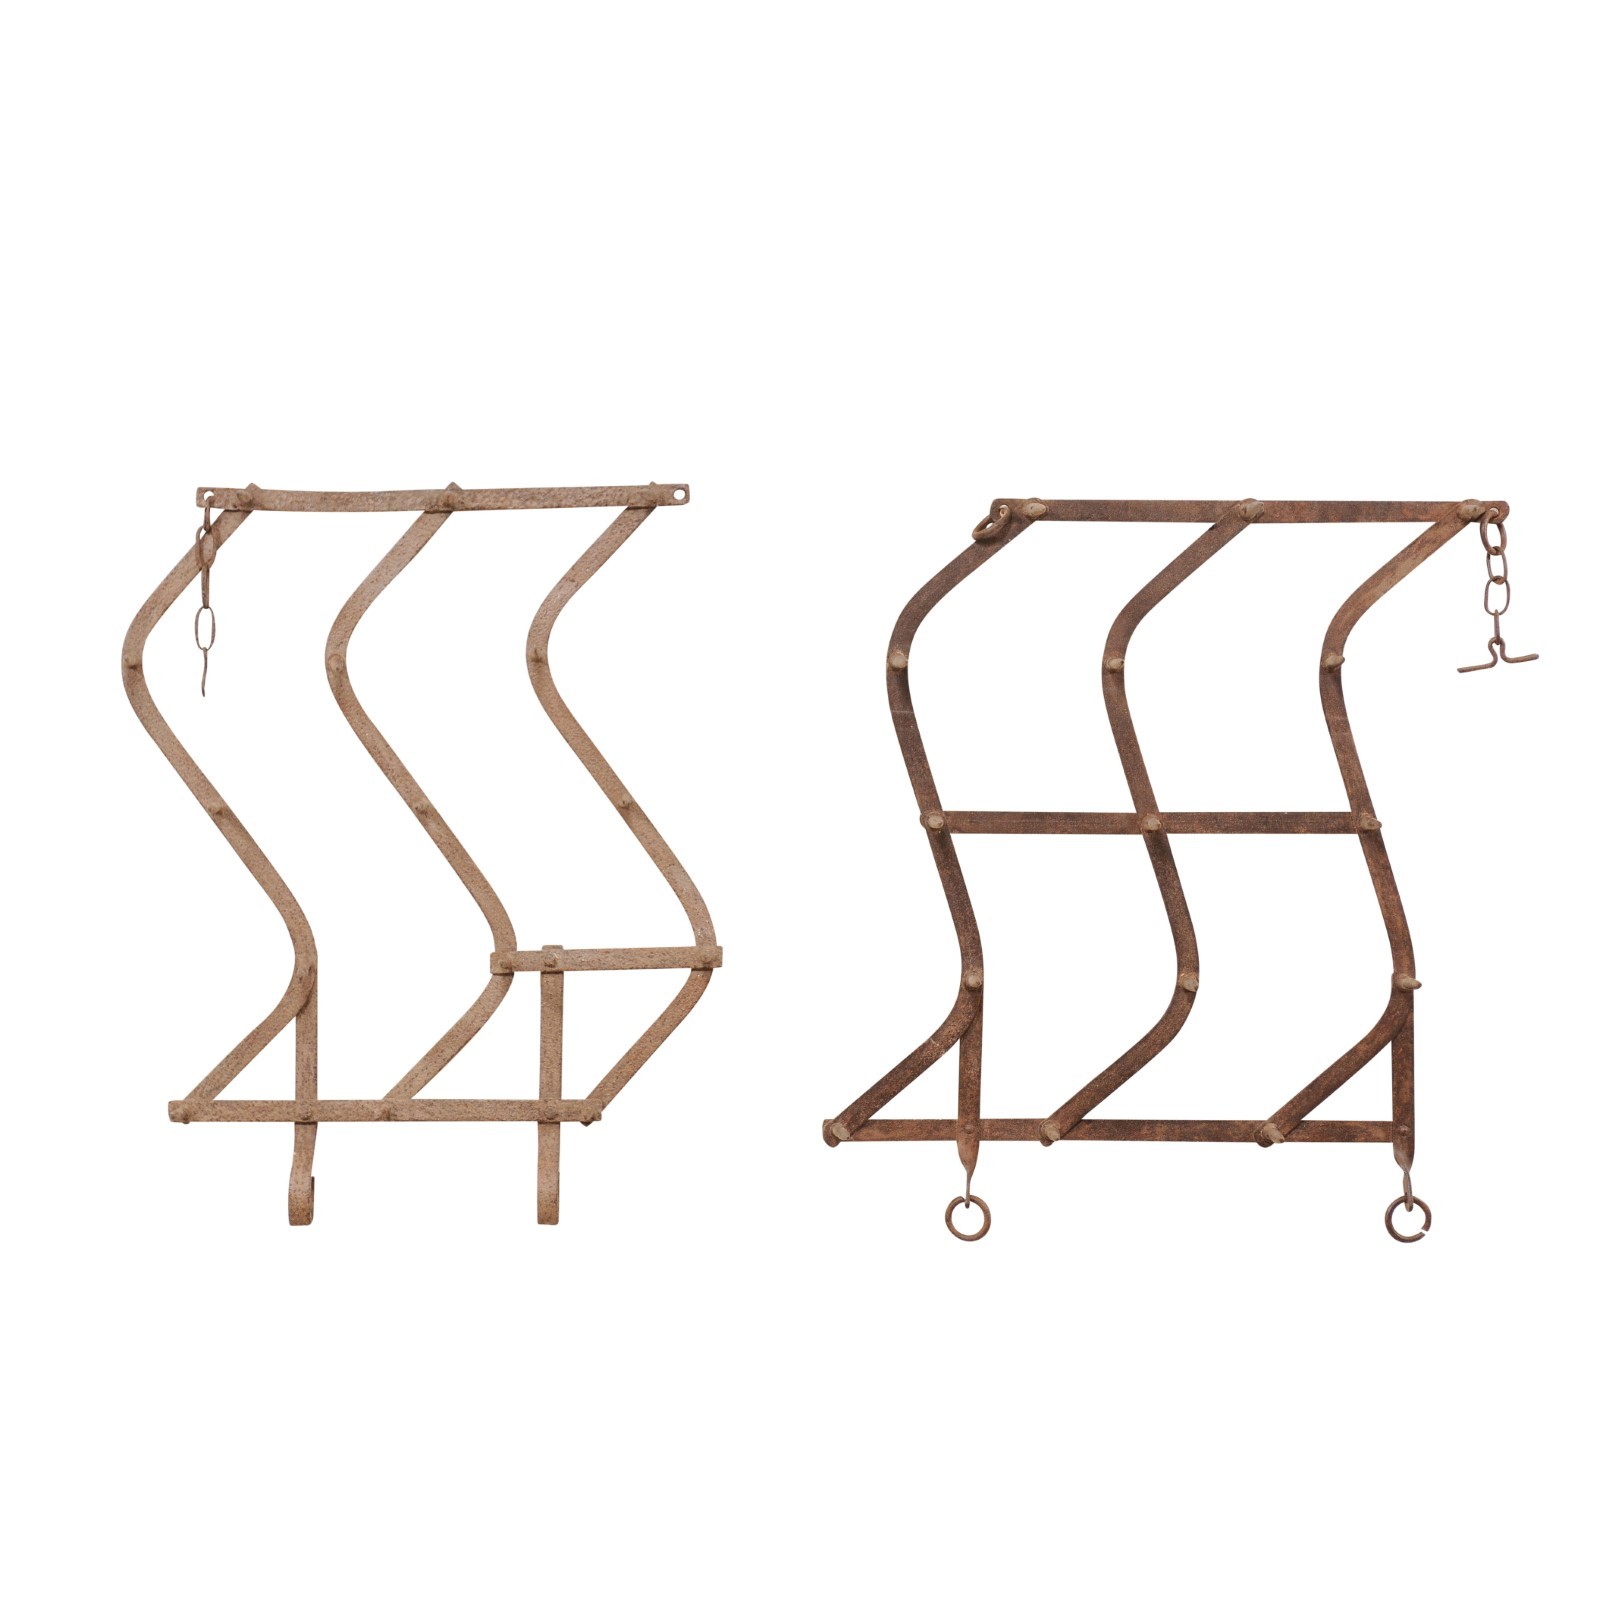 Wall Hanging Iron Kitchen Rack -2 available